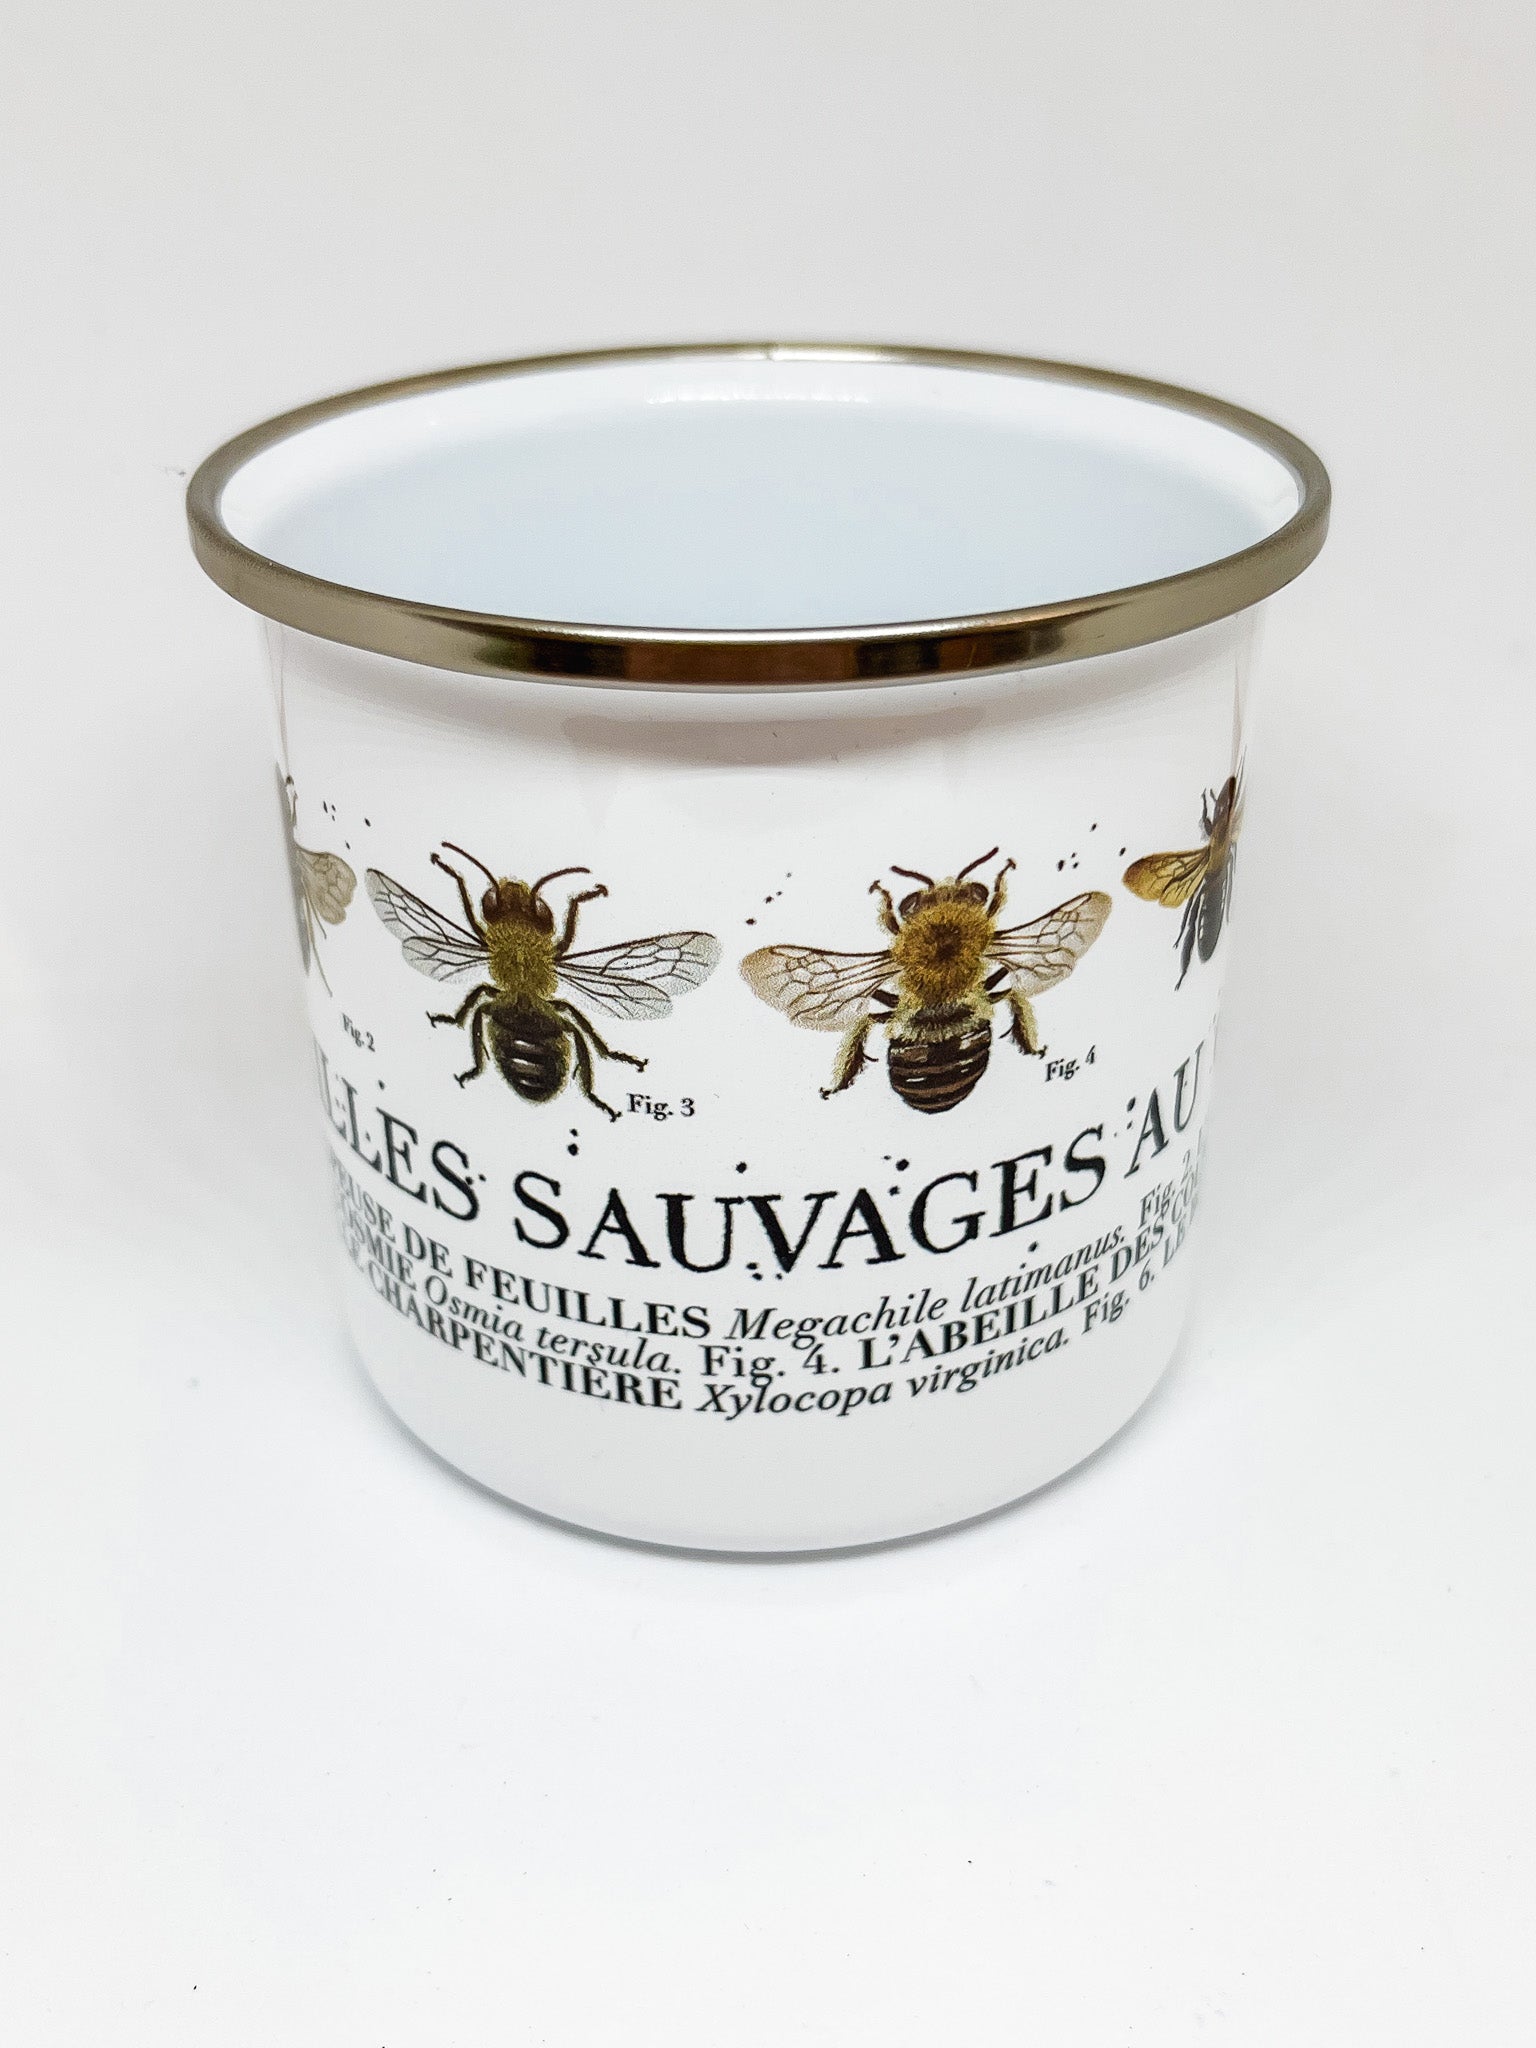 White enamel mug with silver rim and illustrations of wild quebec bees with text below identifying each bee. Figures 3 and 4 visible.